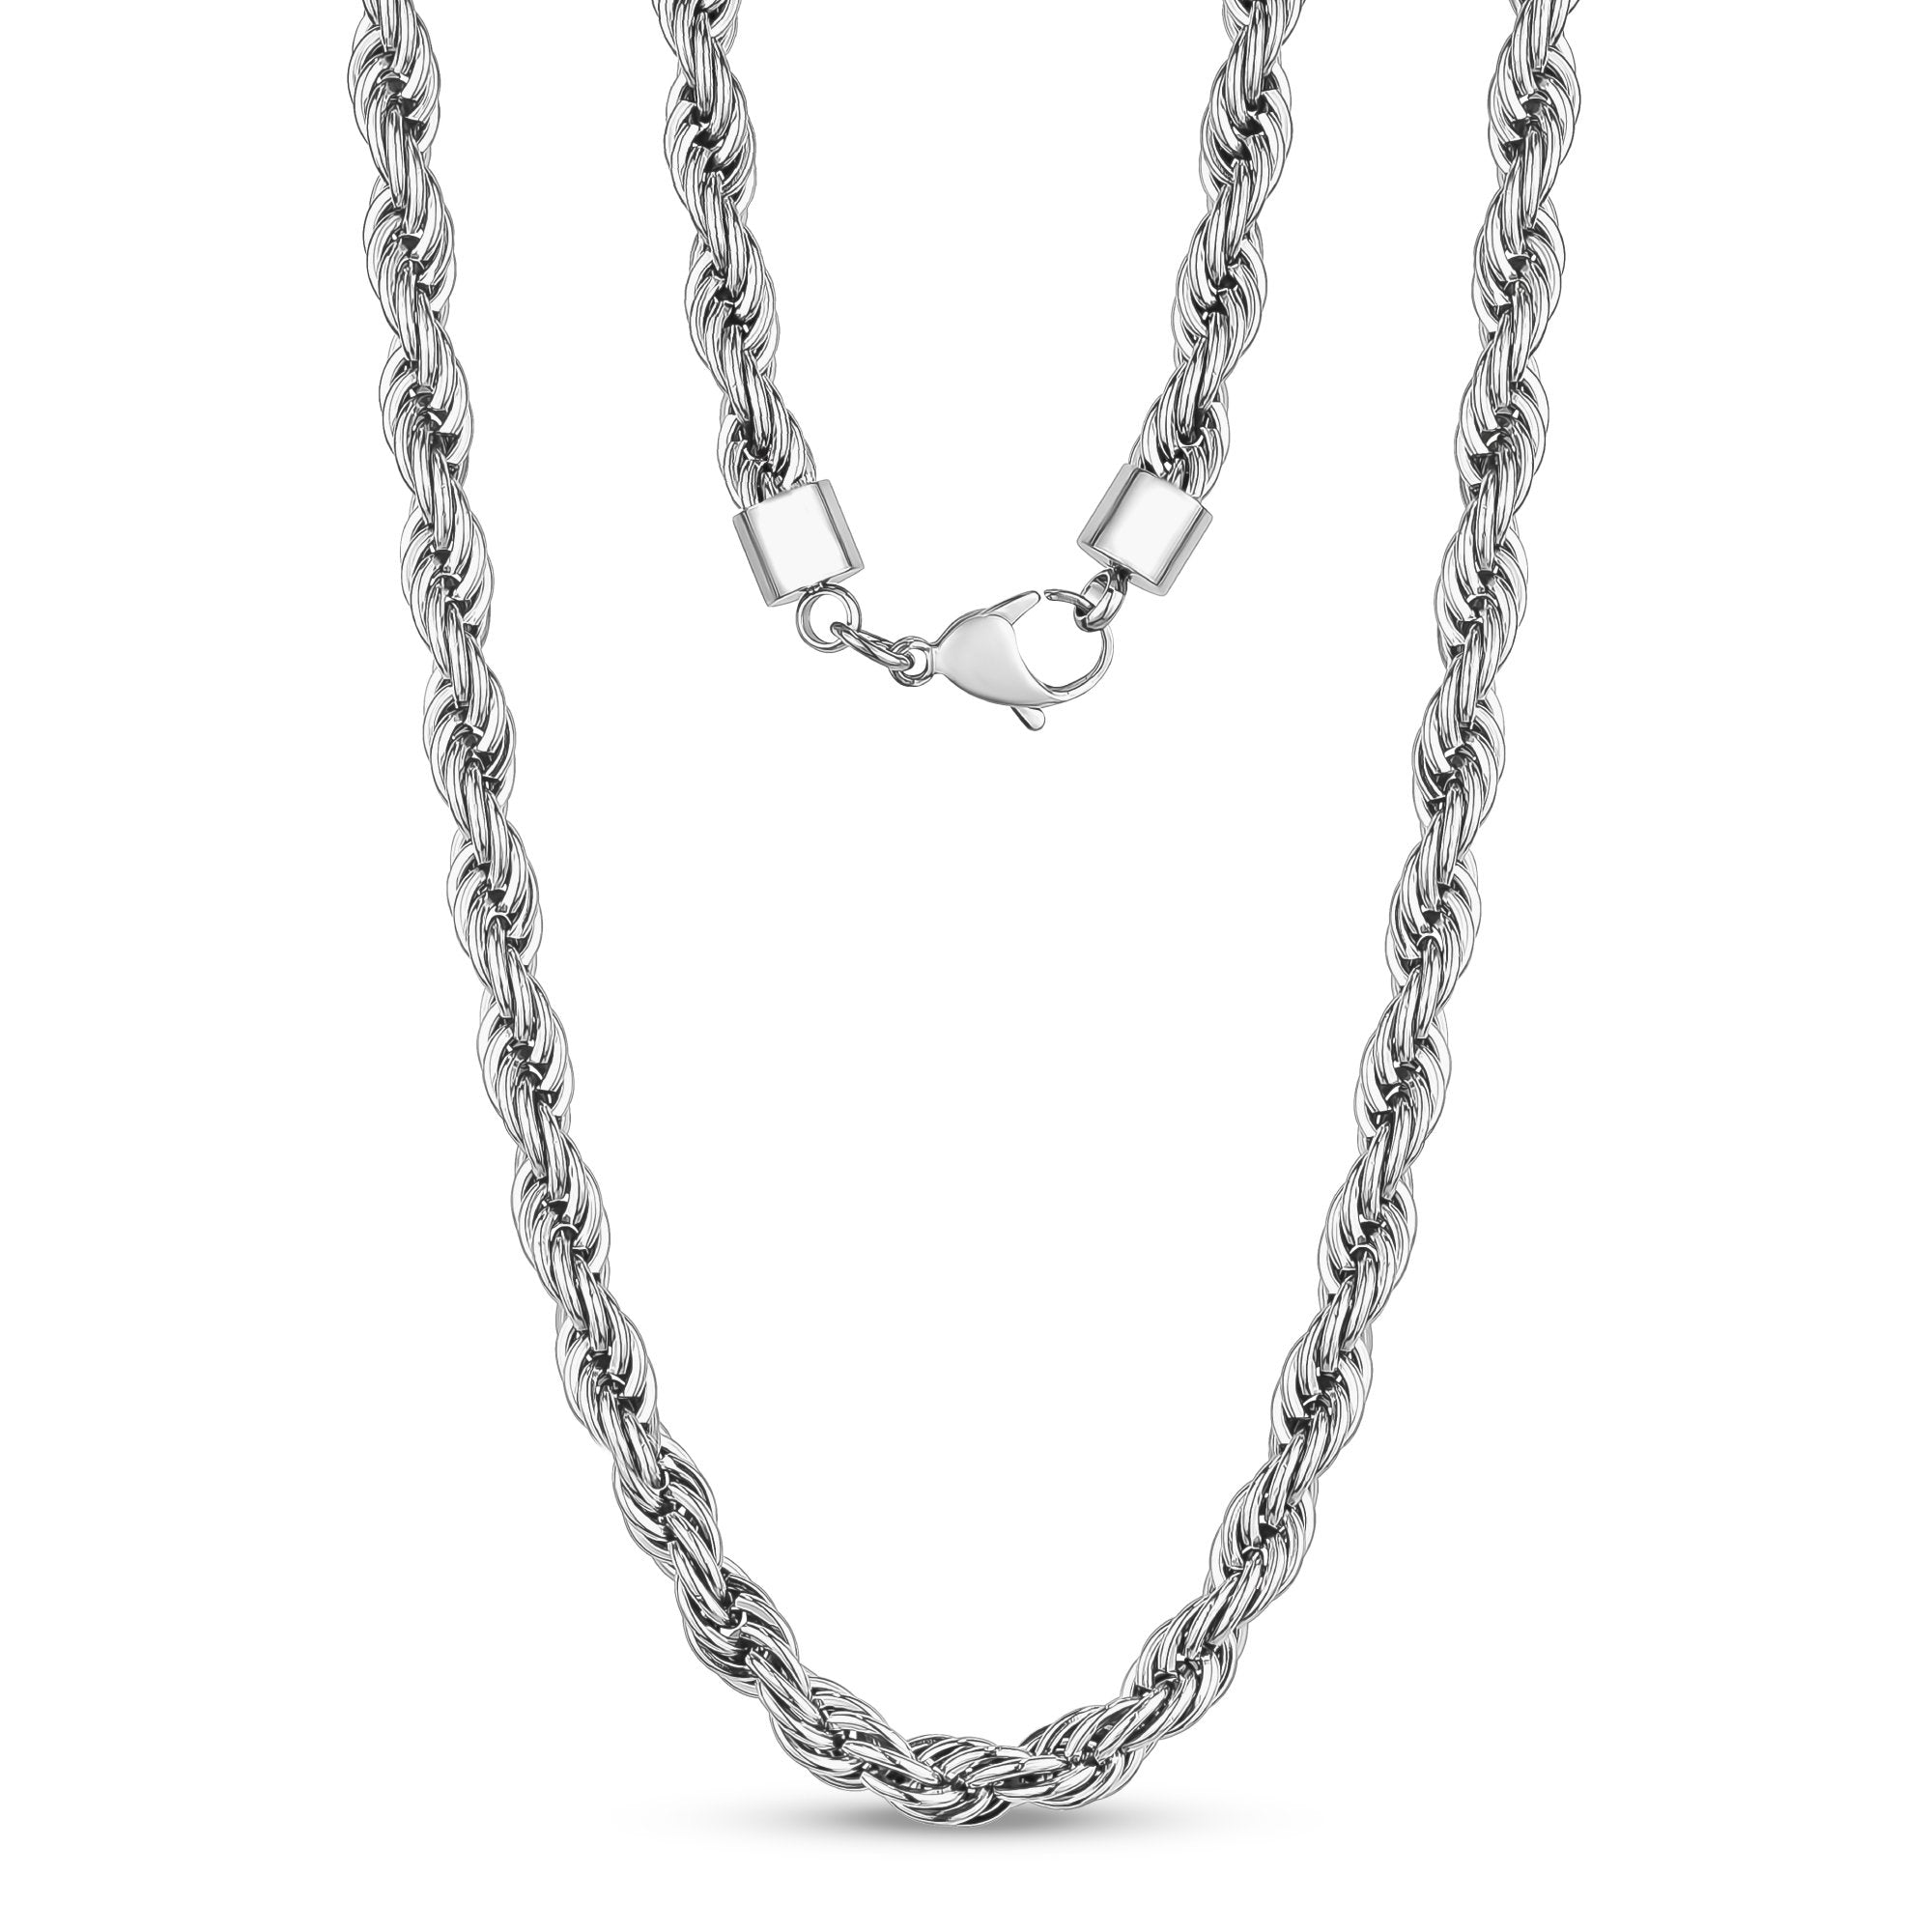 8mm Oversized Stainless Steel Ball Chain, Non Tarnish Chain,silver